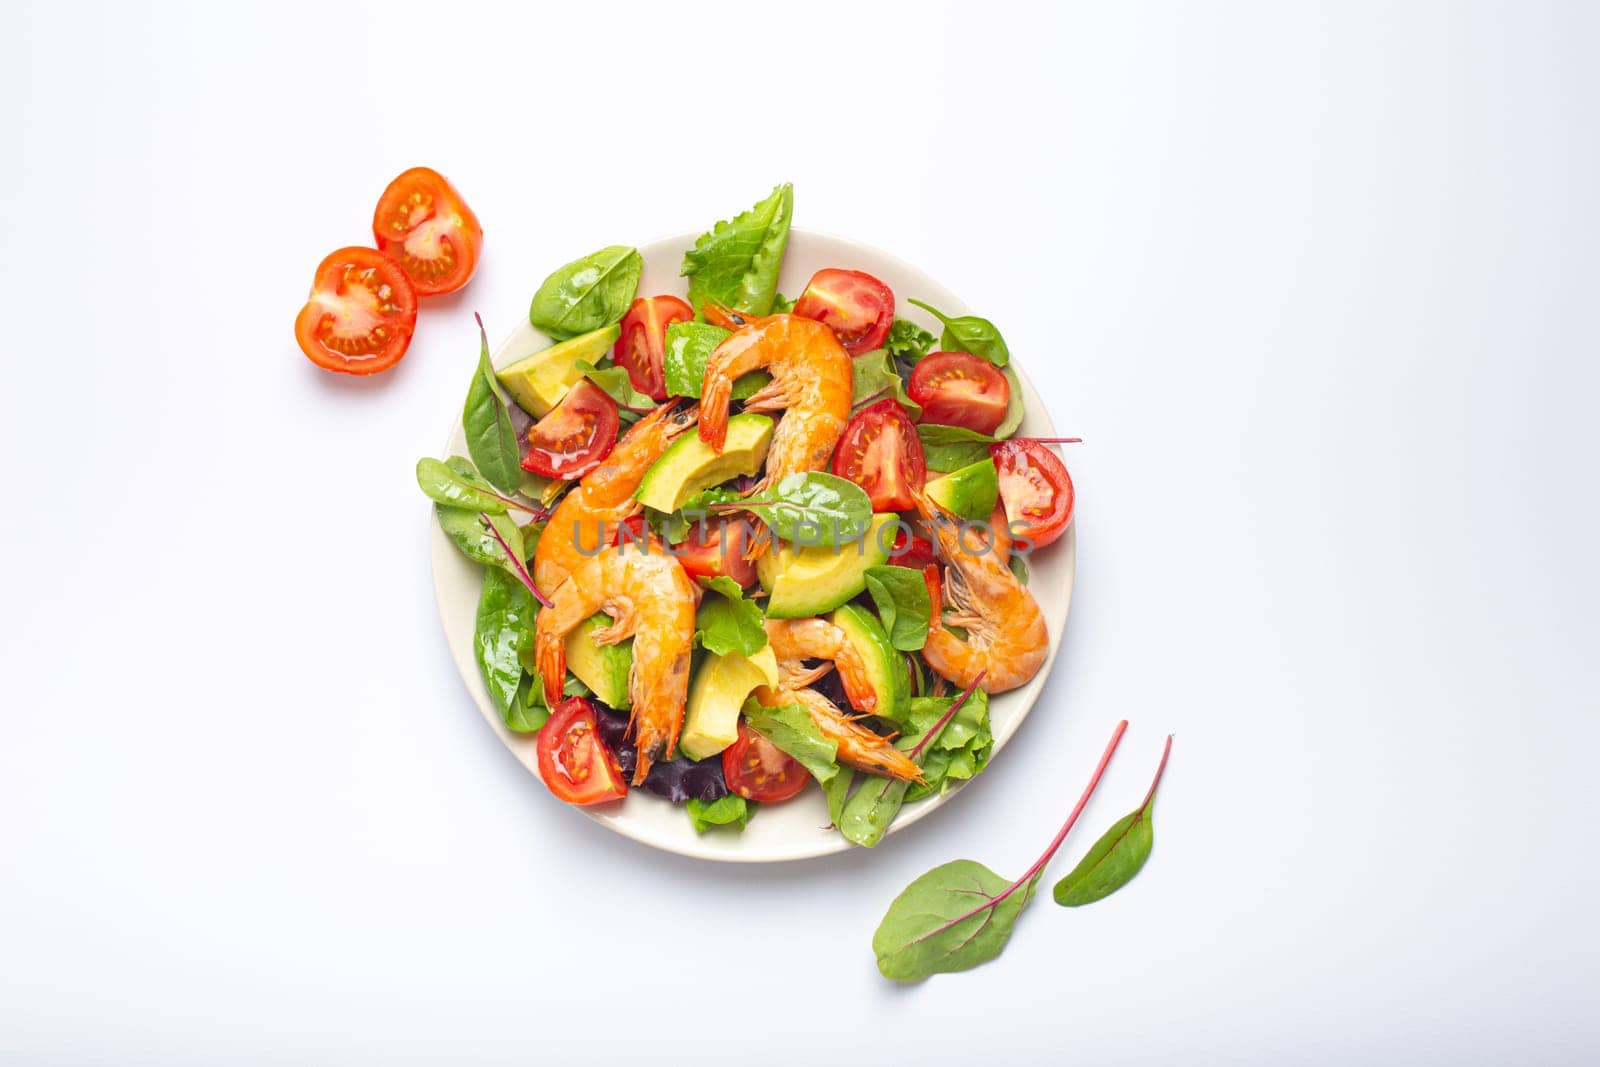 Healthy salad with grilled shrimps, avocado, cherry tomatoes and green leaves on white plate isolated on white background top view. Clean eating, nutrition and dieting concept..